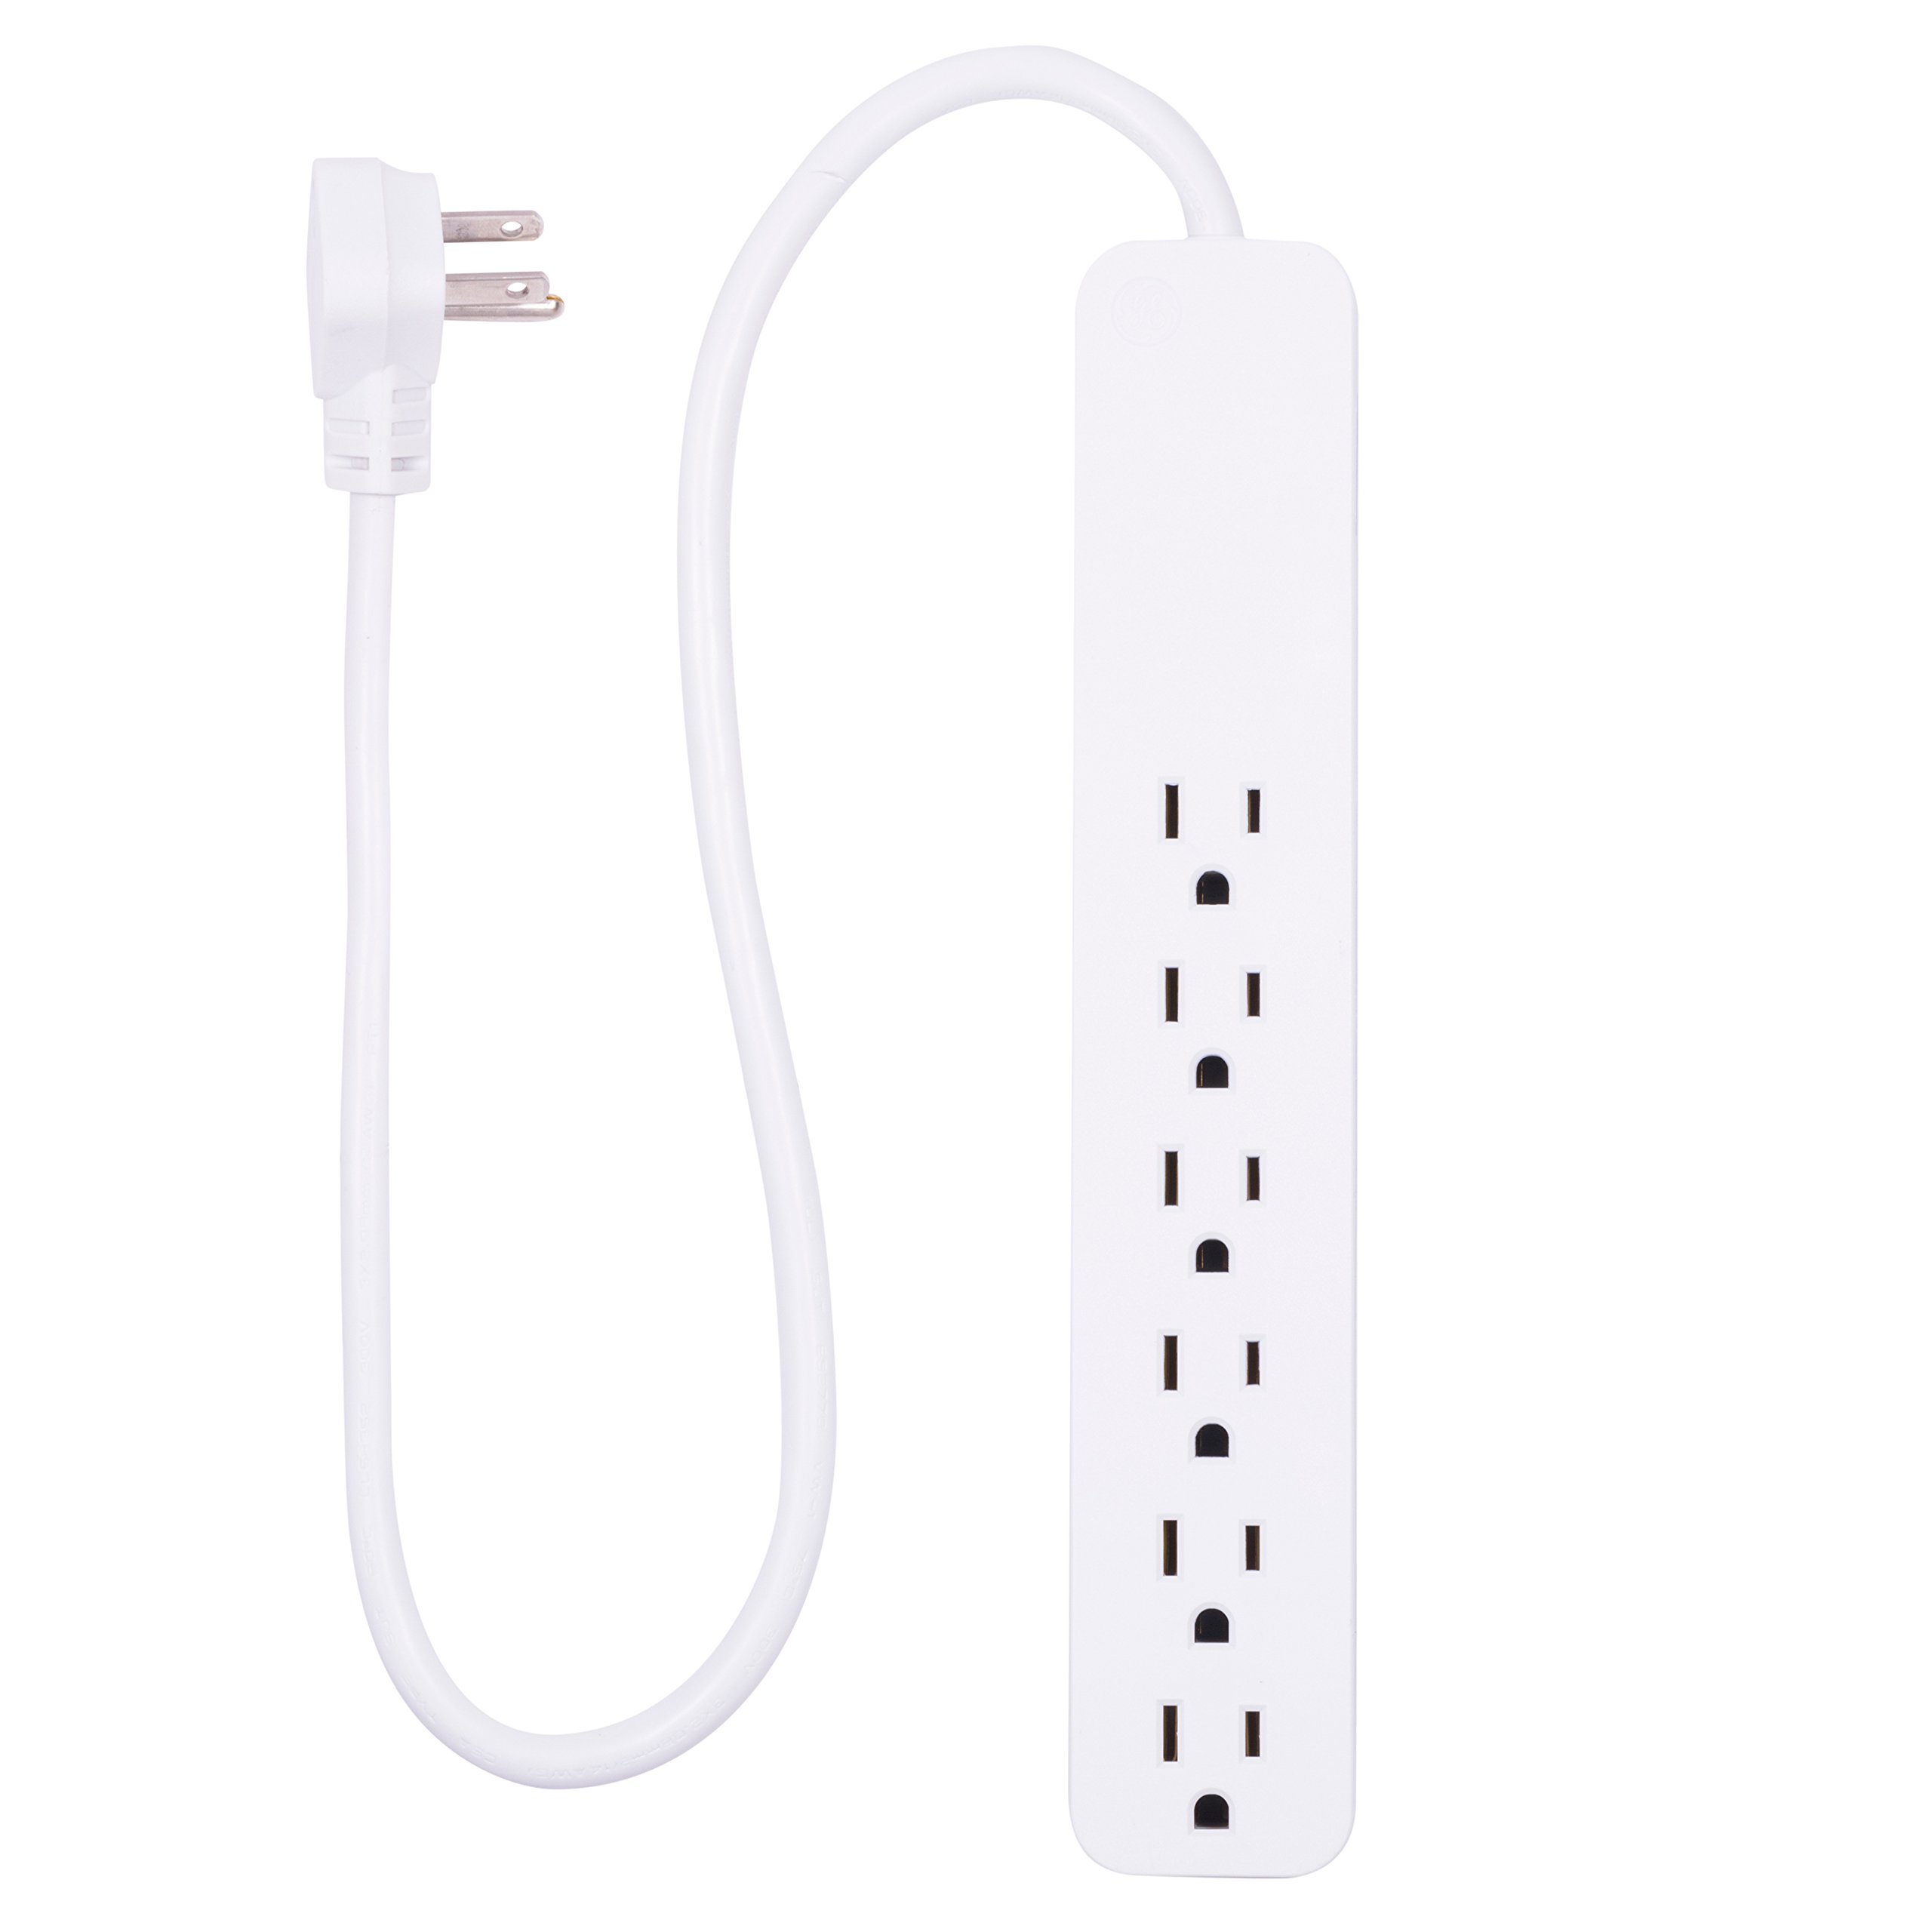 GE Power Strip Surge Protector, 6 Outlets, Flat Plug, 2ft Power Cord, Wall Mount, White, 40532 & Designer 1 Ft. Power Strip, 3 Grounded Outlets, Flat Plug, Mini Cord, Premium, White, 45190